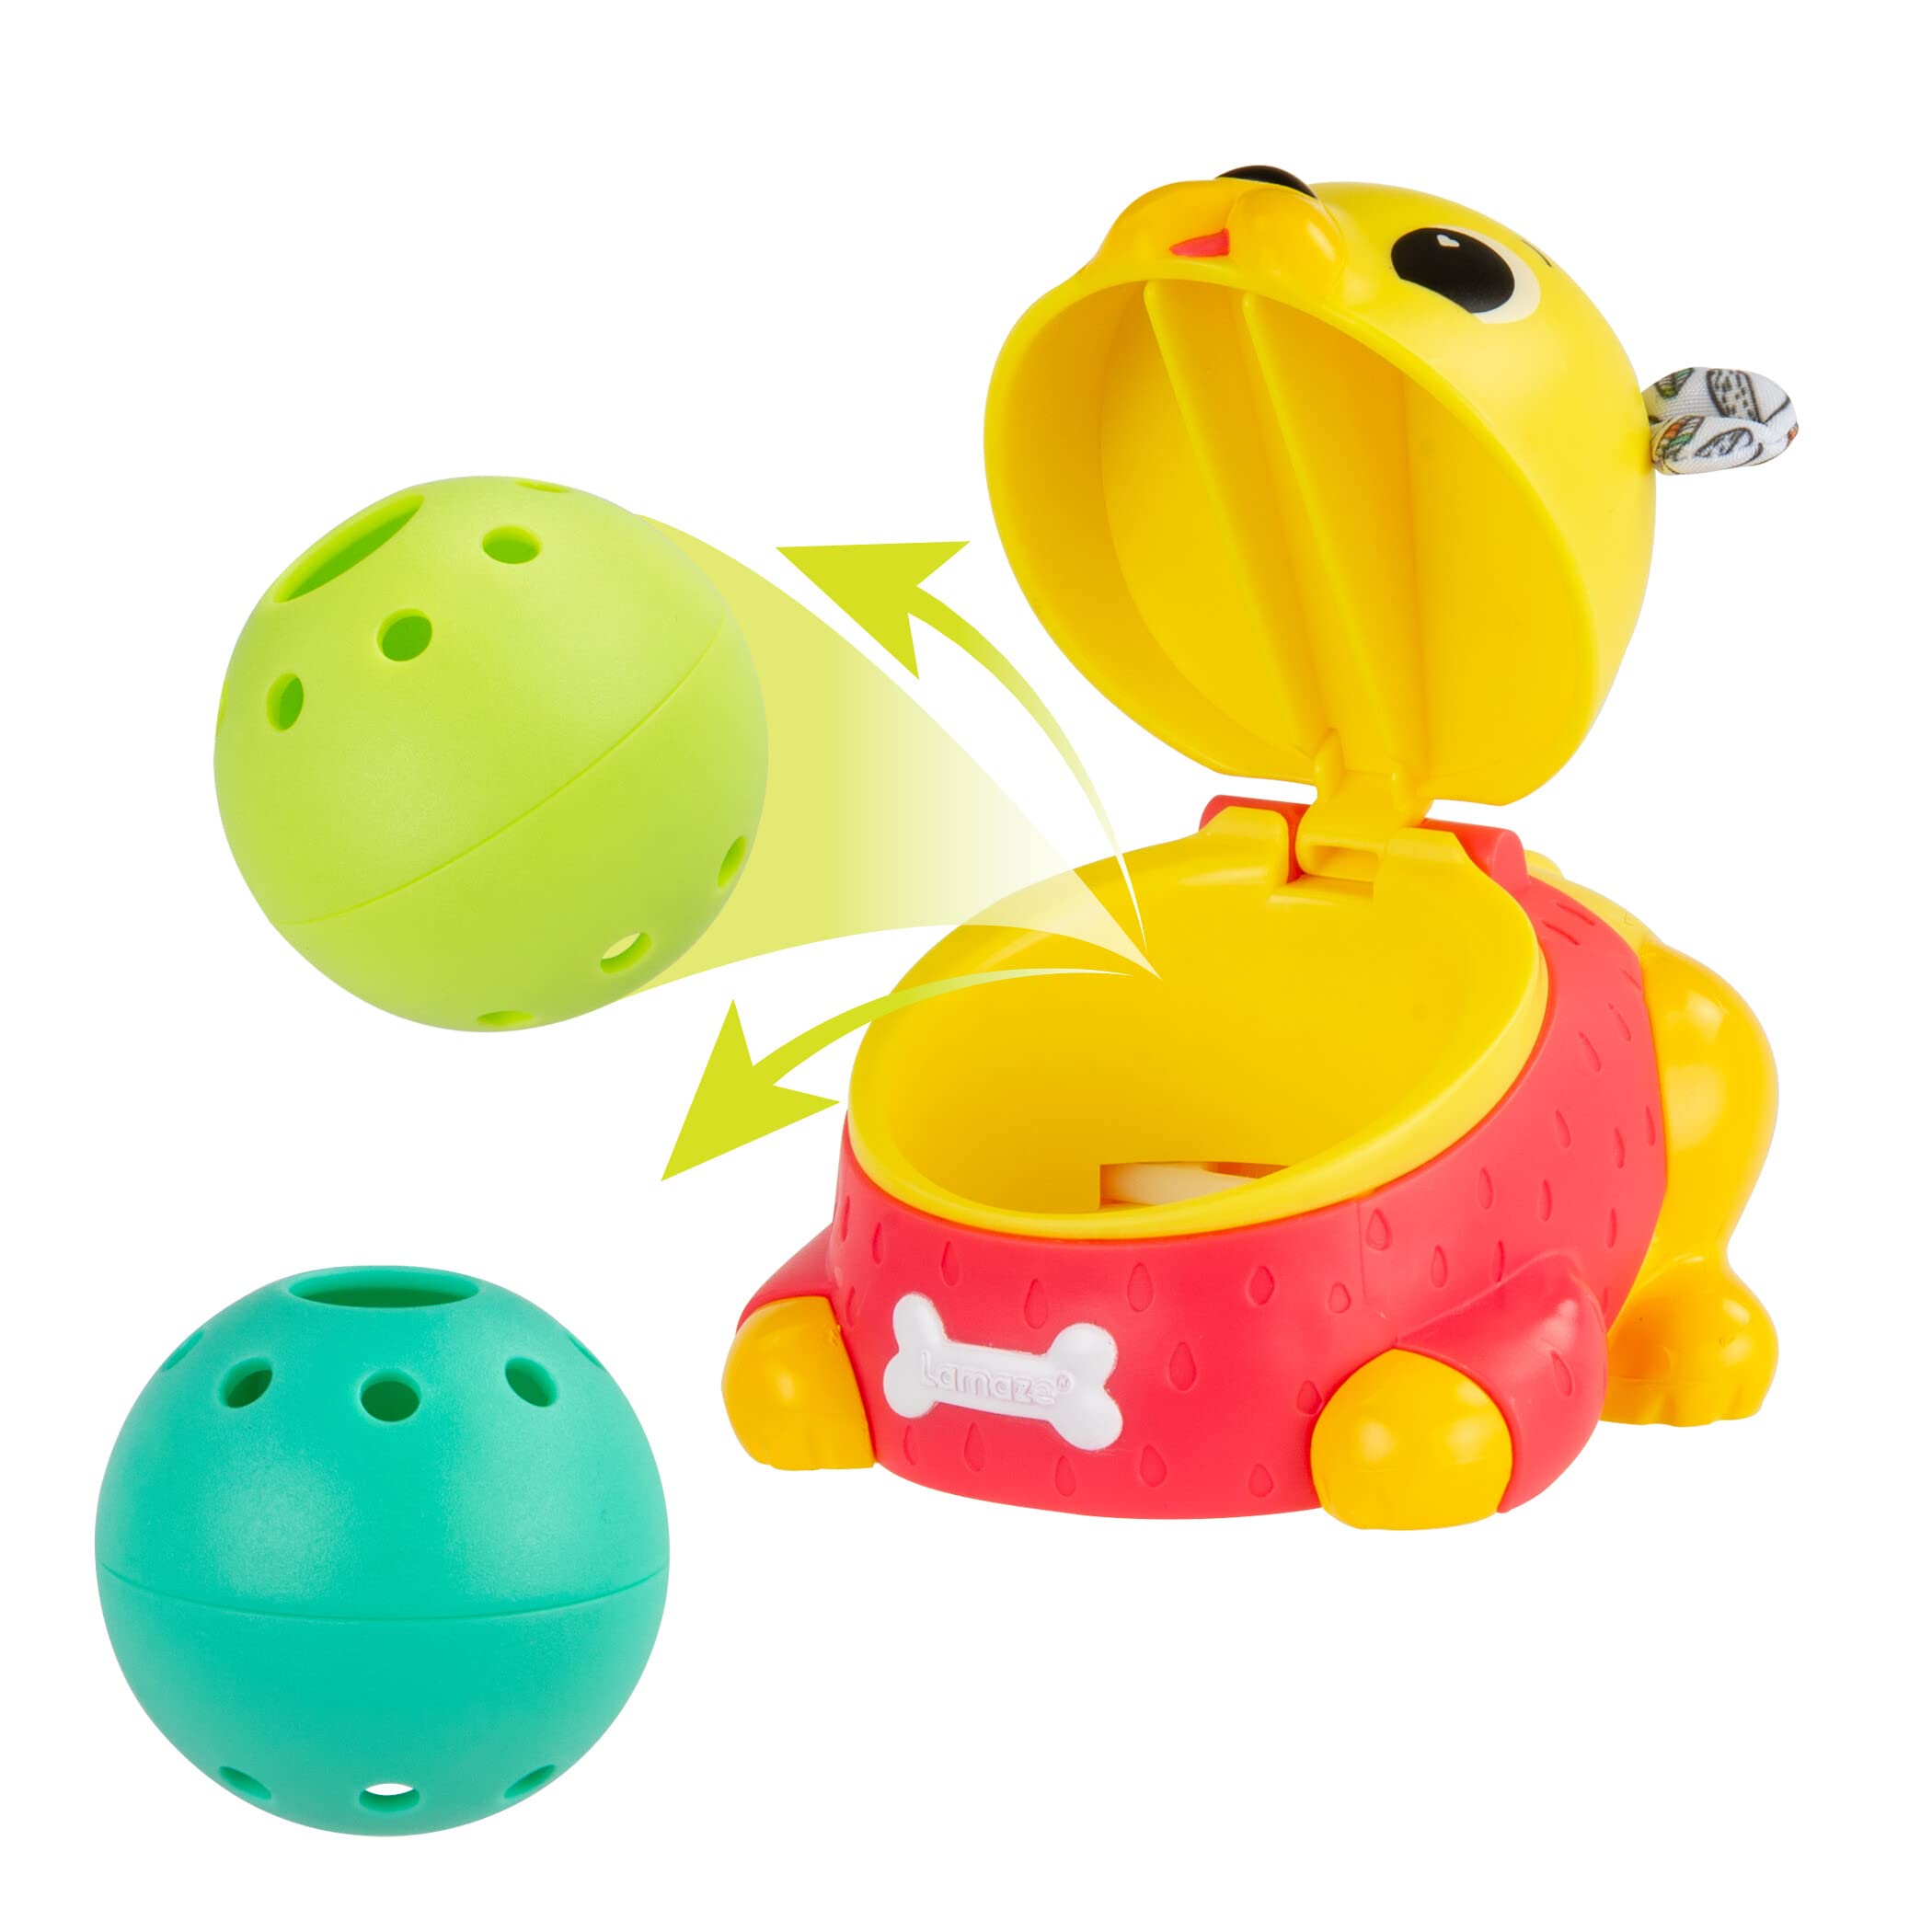 Lamaze Crawl & Chase Pug Popper - Baby Sensory Toys - Development Baby Toys for Boys and Girls Aged 18 Months and Up